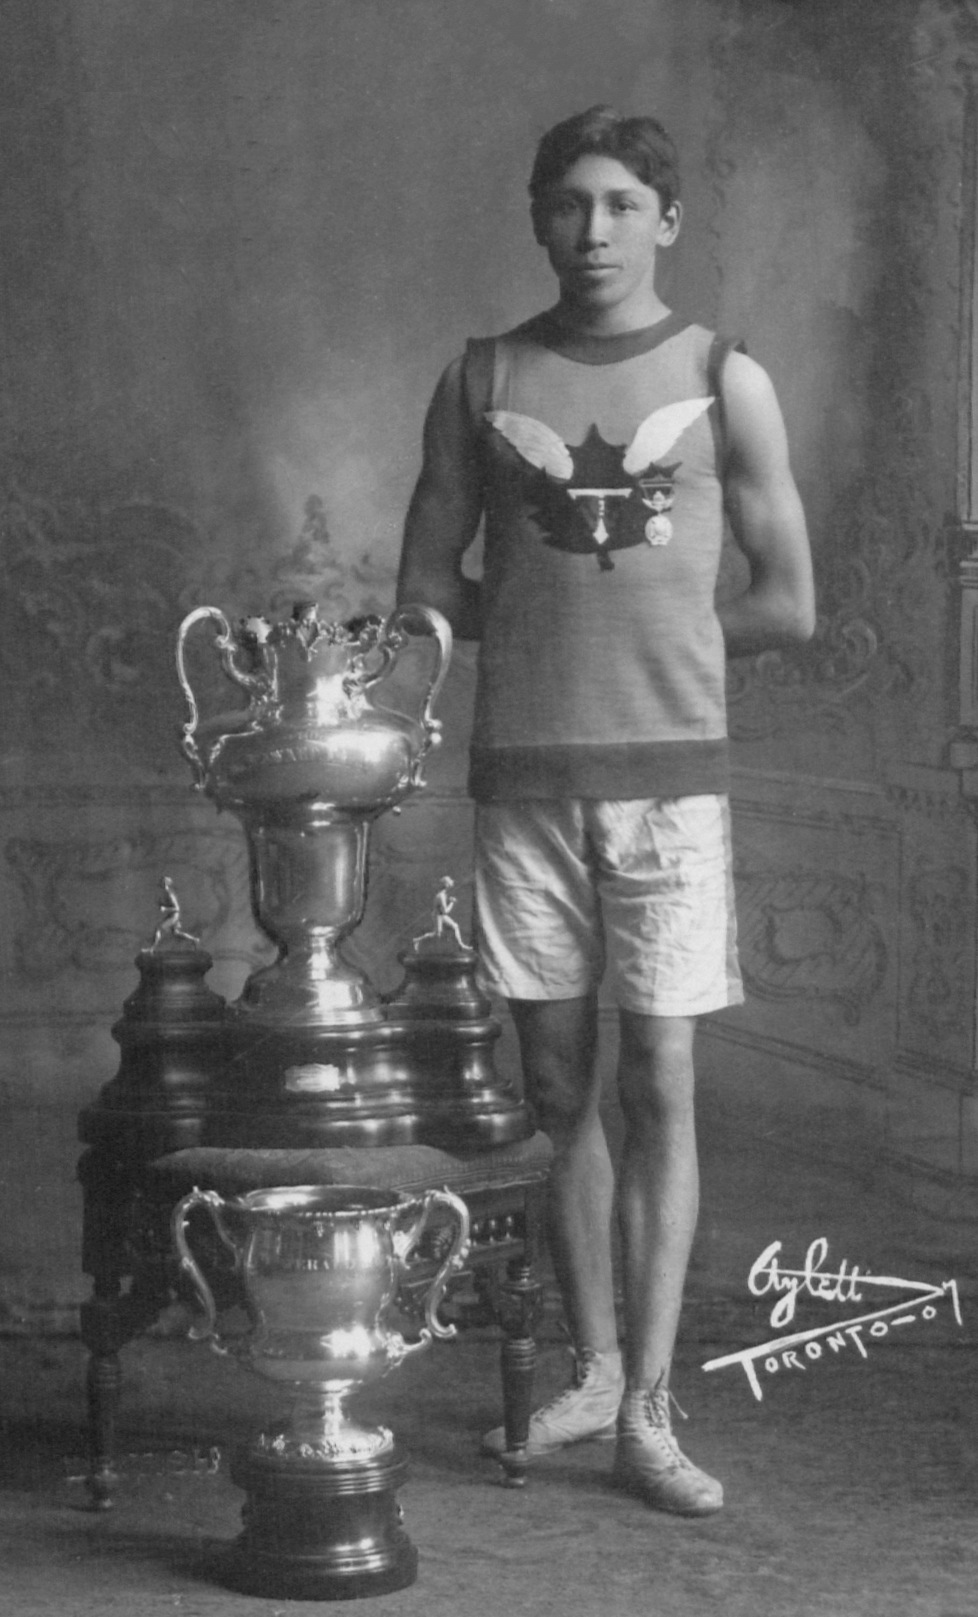 A young man poses beside two large trophies. He wears shorts, a tank top, and running shoes.